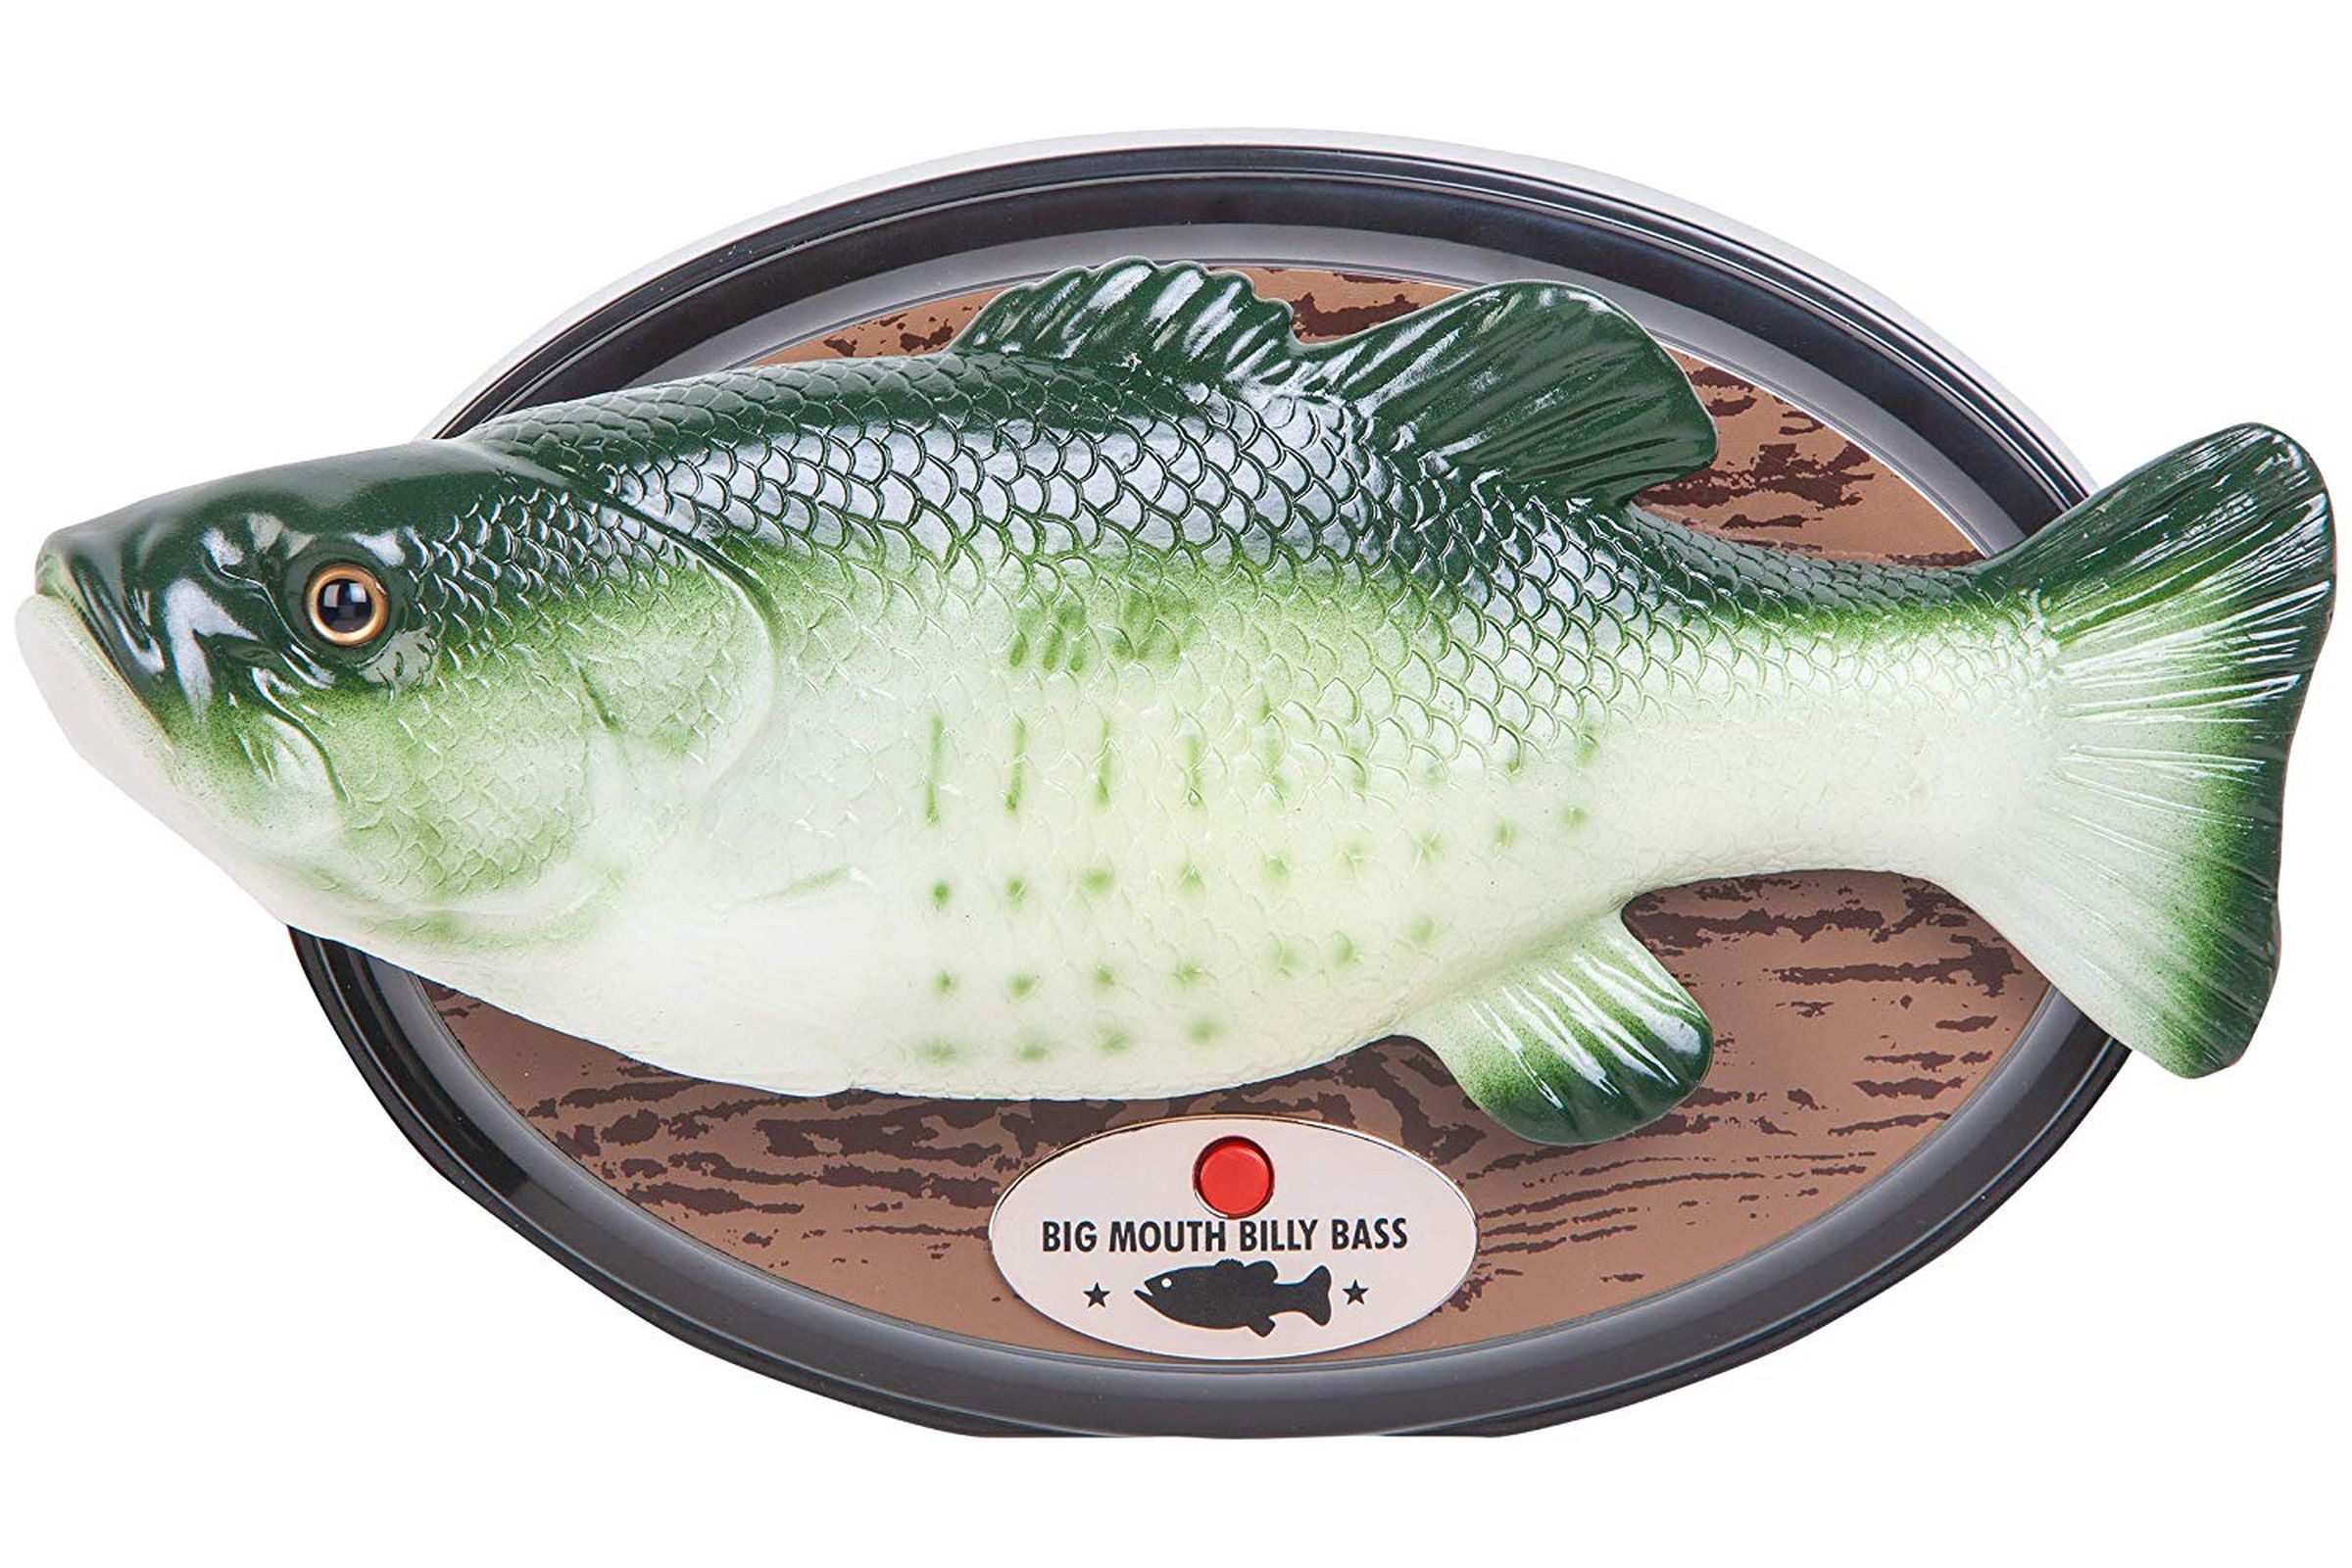 A prize catch: the Alexa-enabled Big Mouth Billy Bass. 